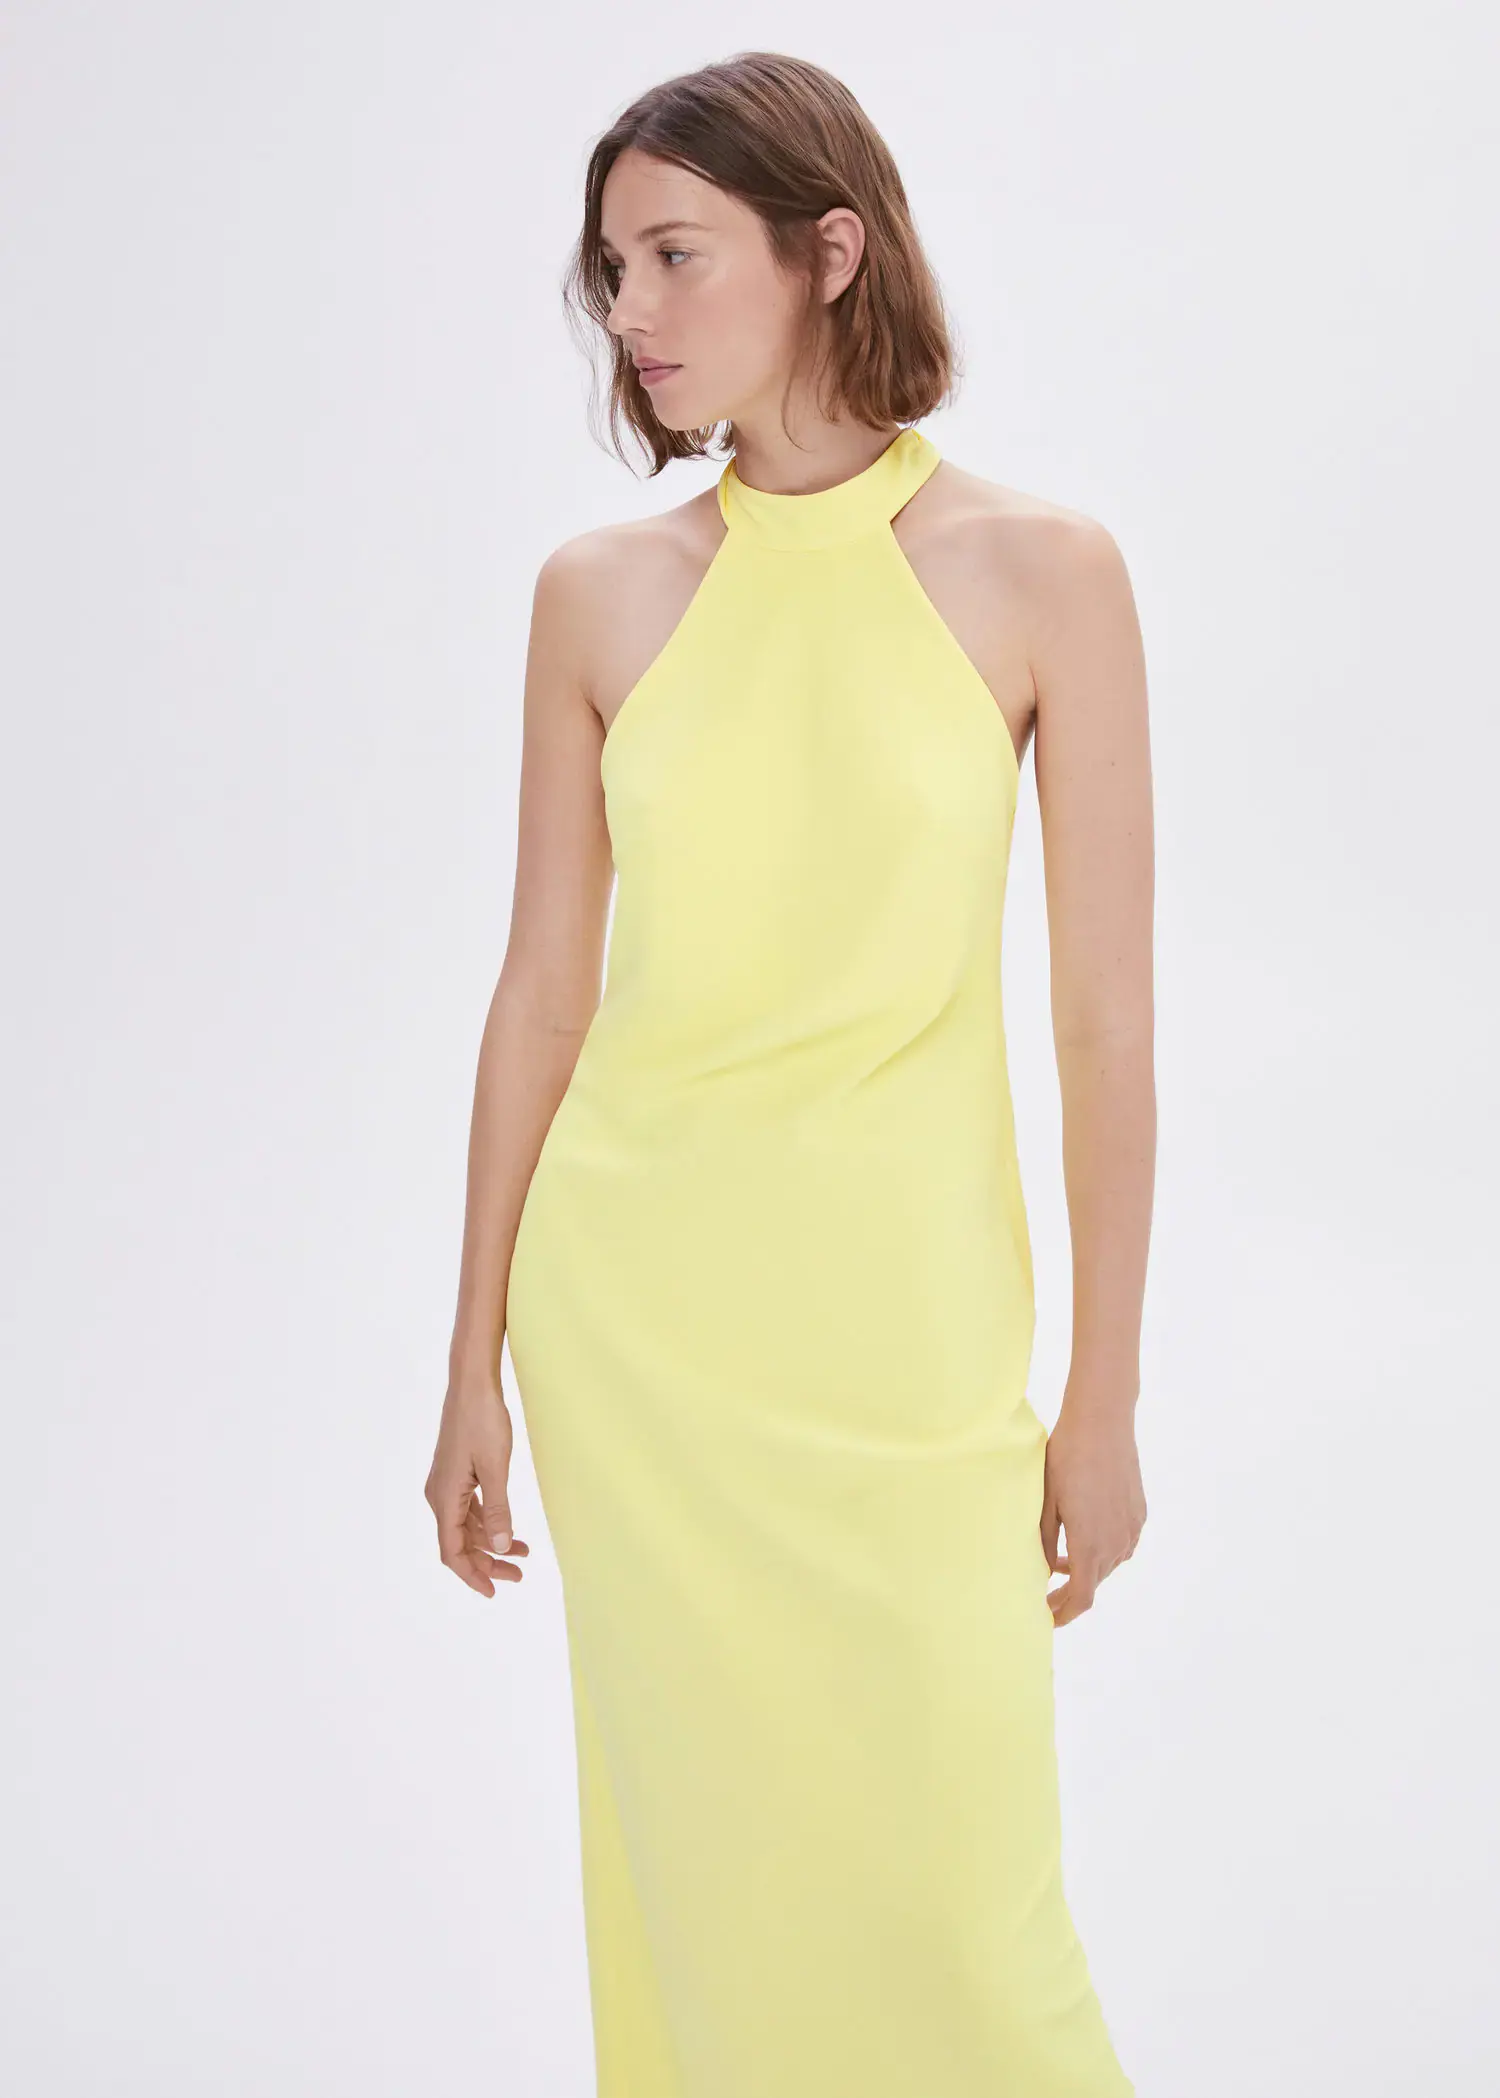 Mango Halter-neck open-back dress. a woman wearing a yellow dress standing in front of a white wall. 